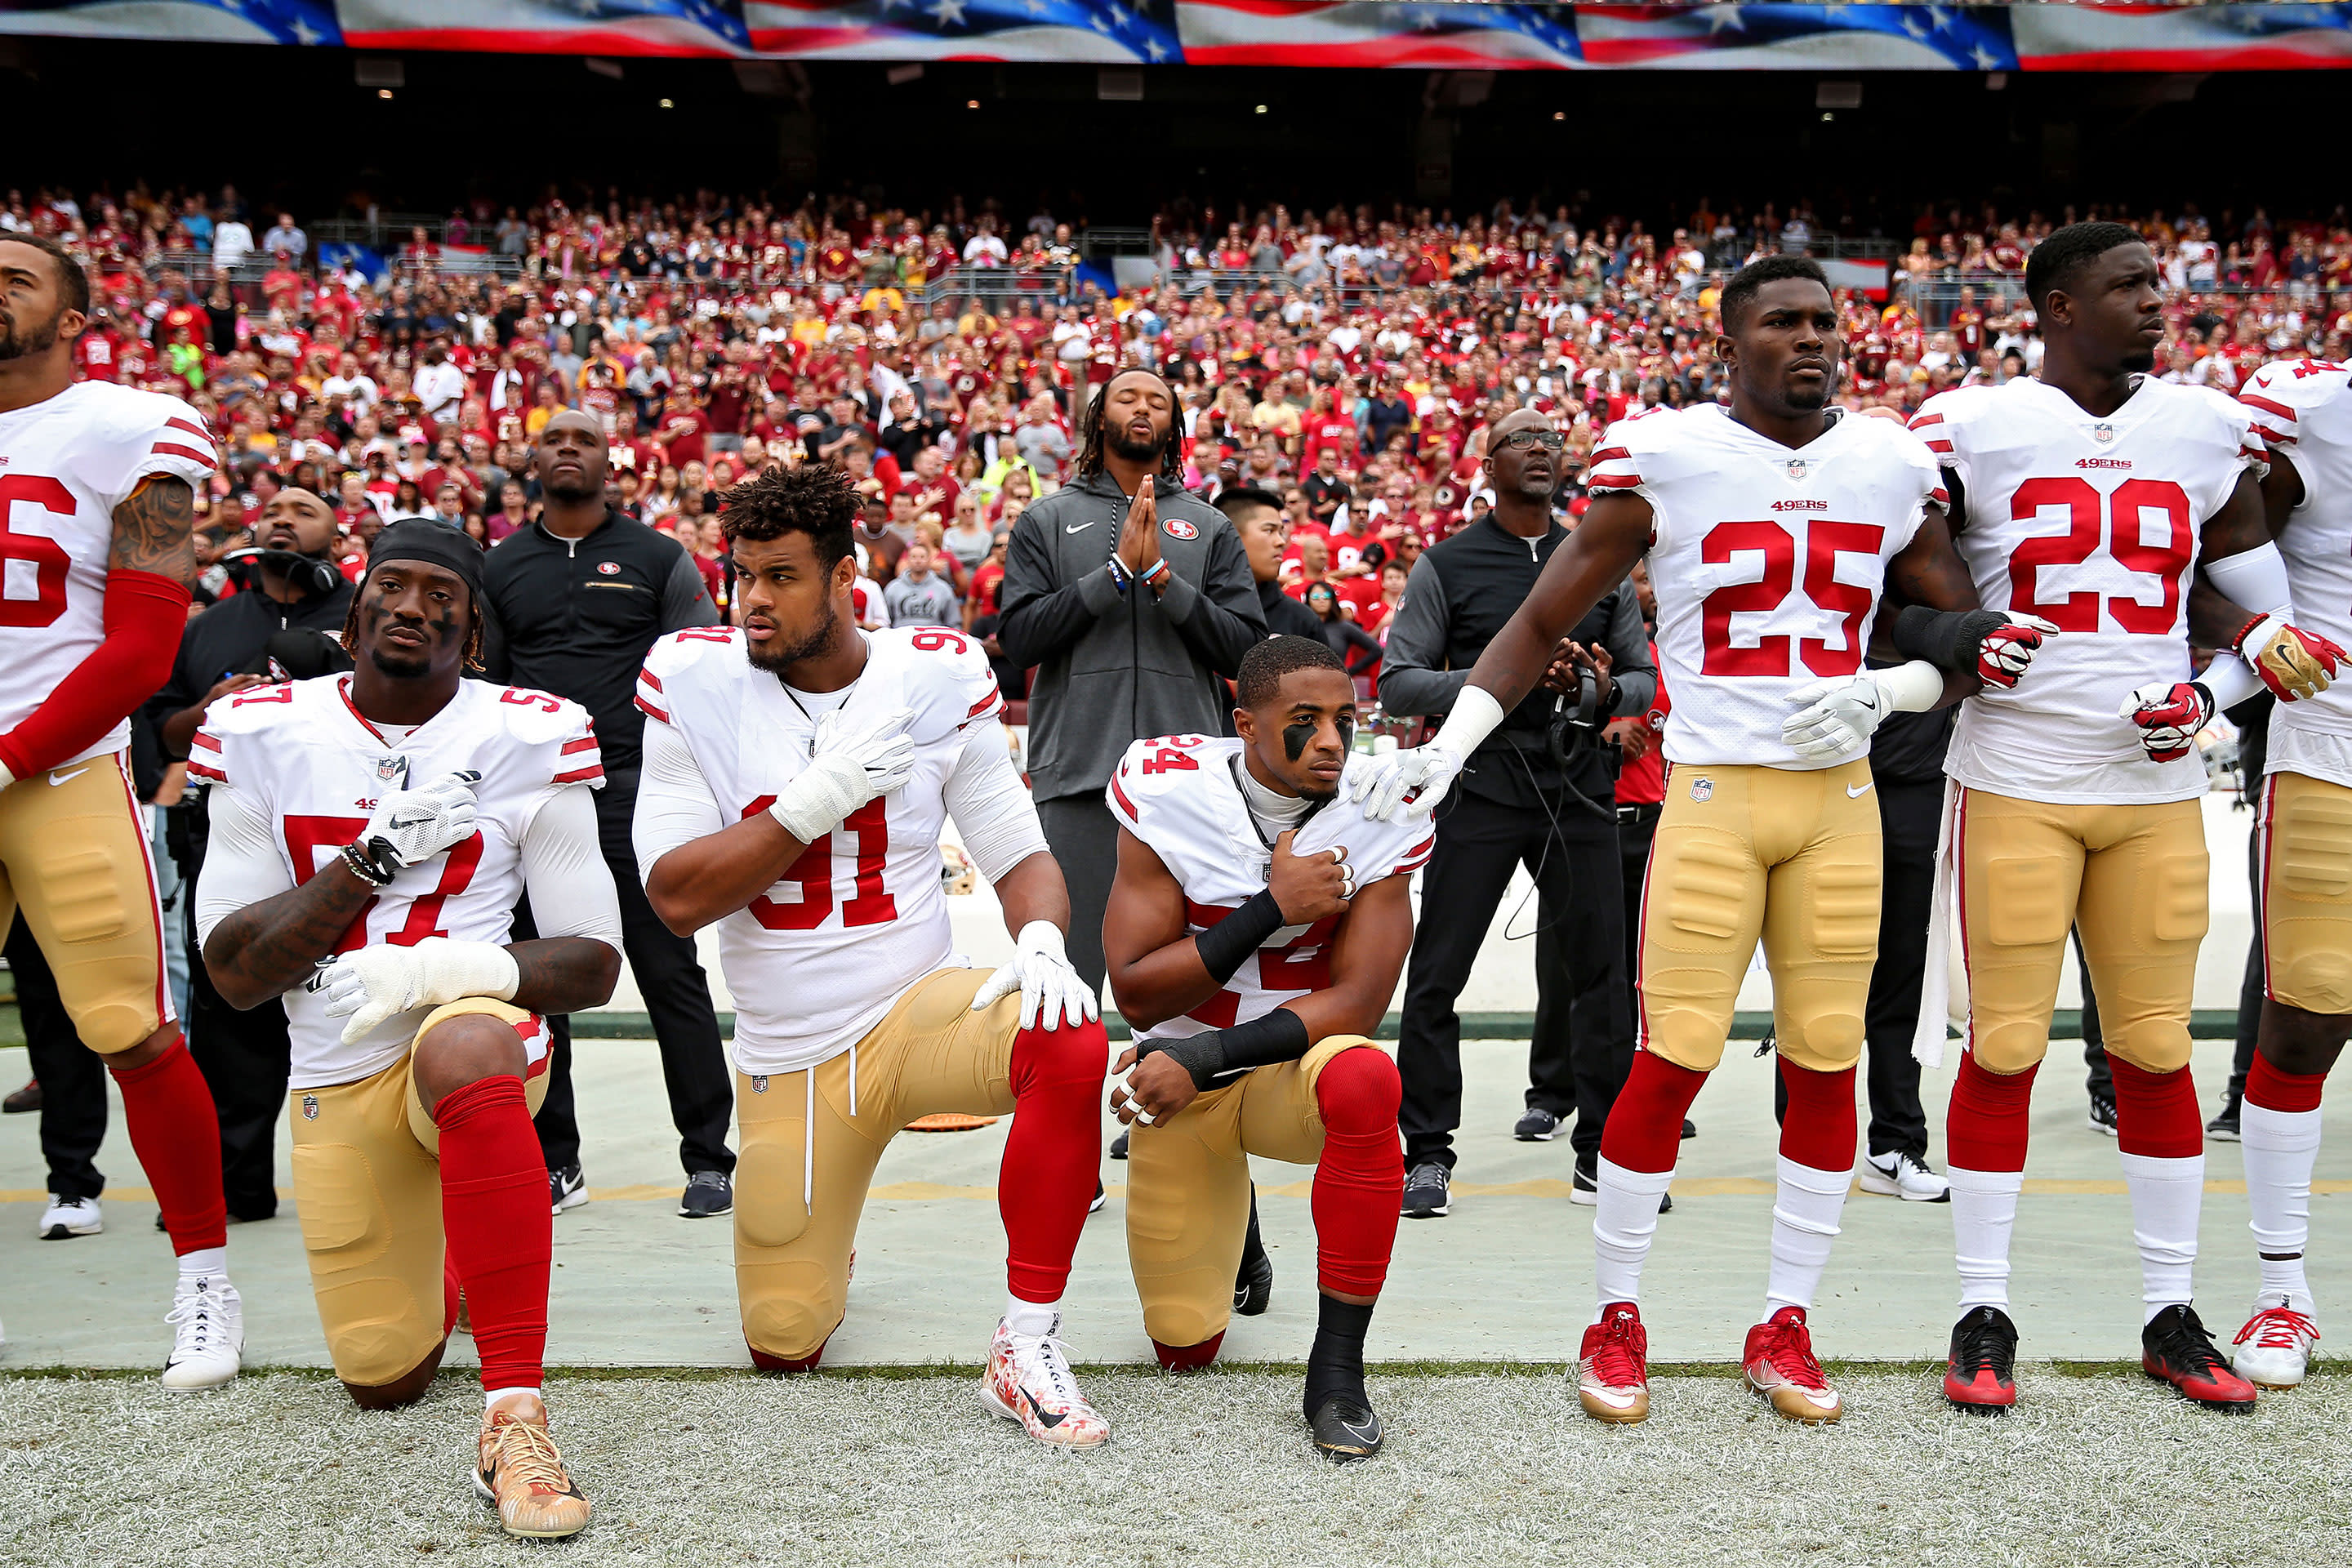 Nfl Players Association Challenges League Policy On Kneeling During National Anthem 